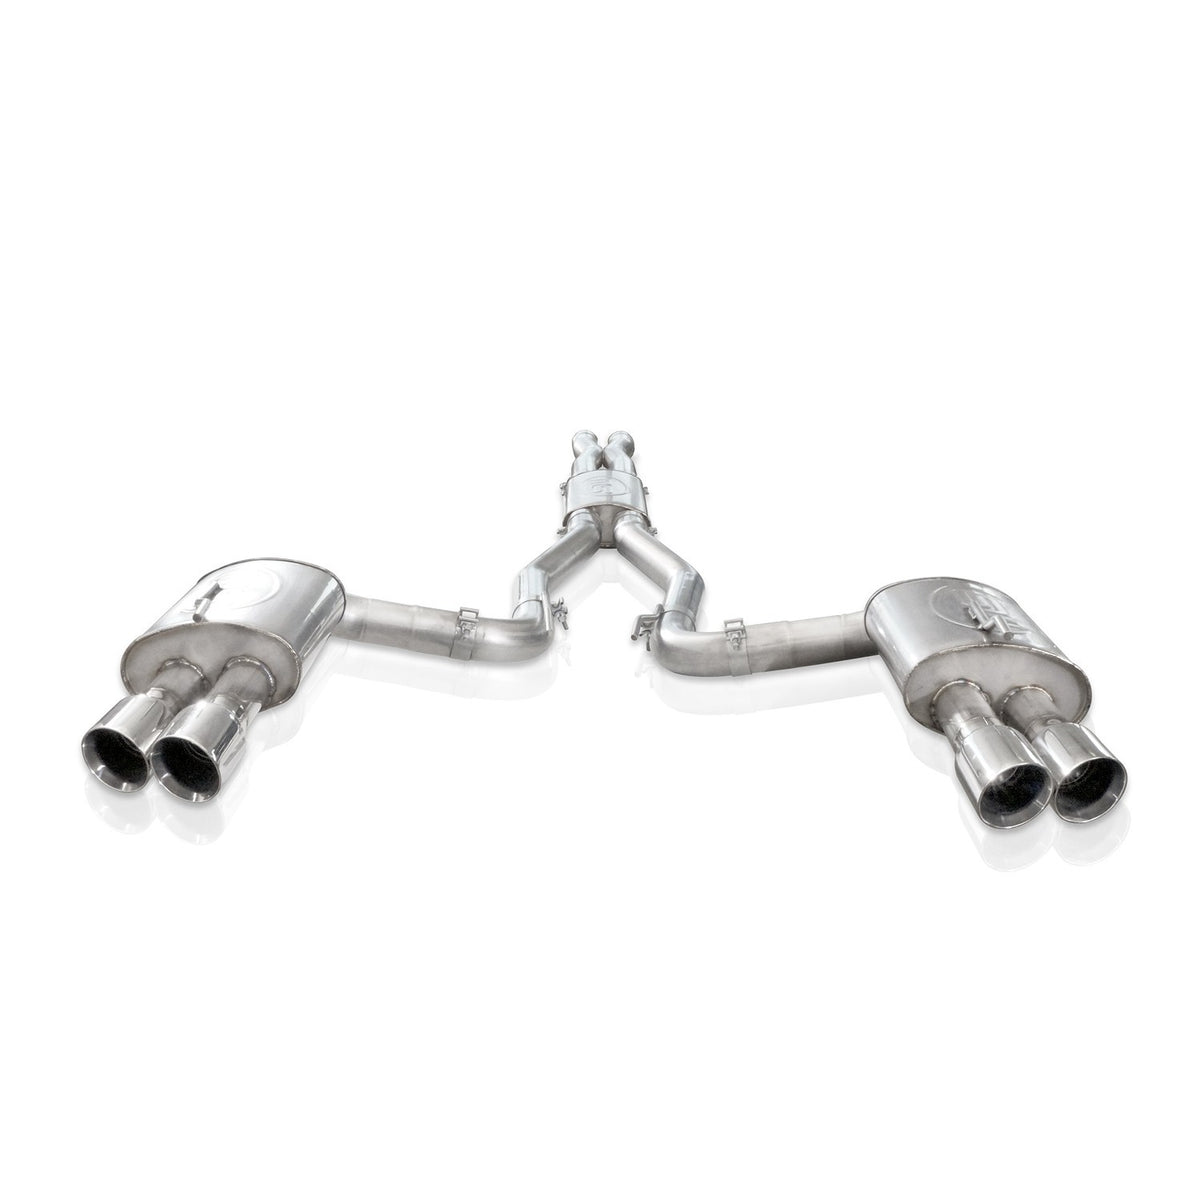 stainless-works-catback-dual-turbo-s-tube-mufflers-performance-connect-4-2